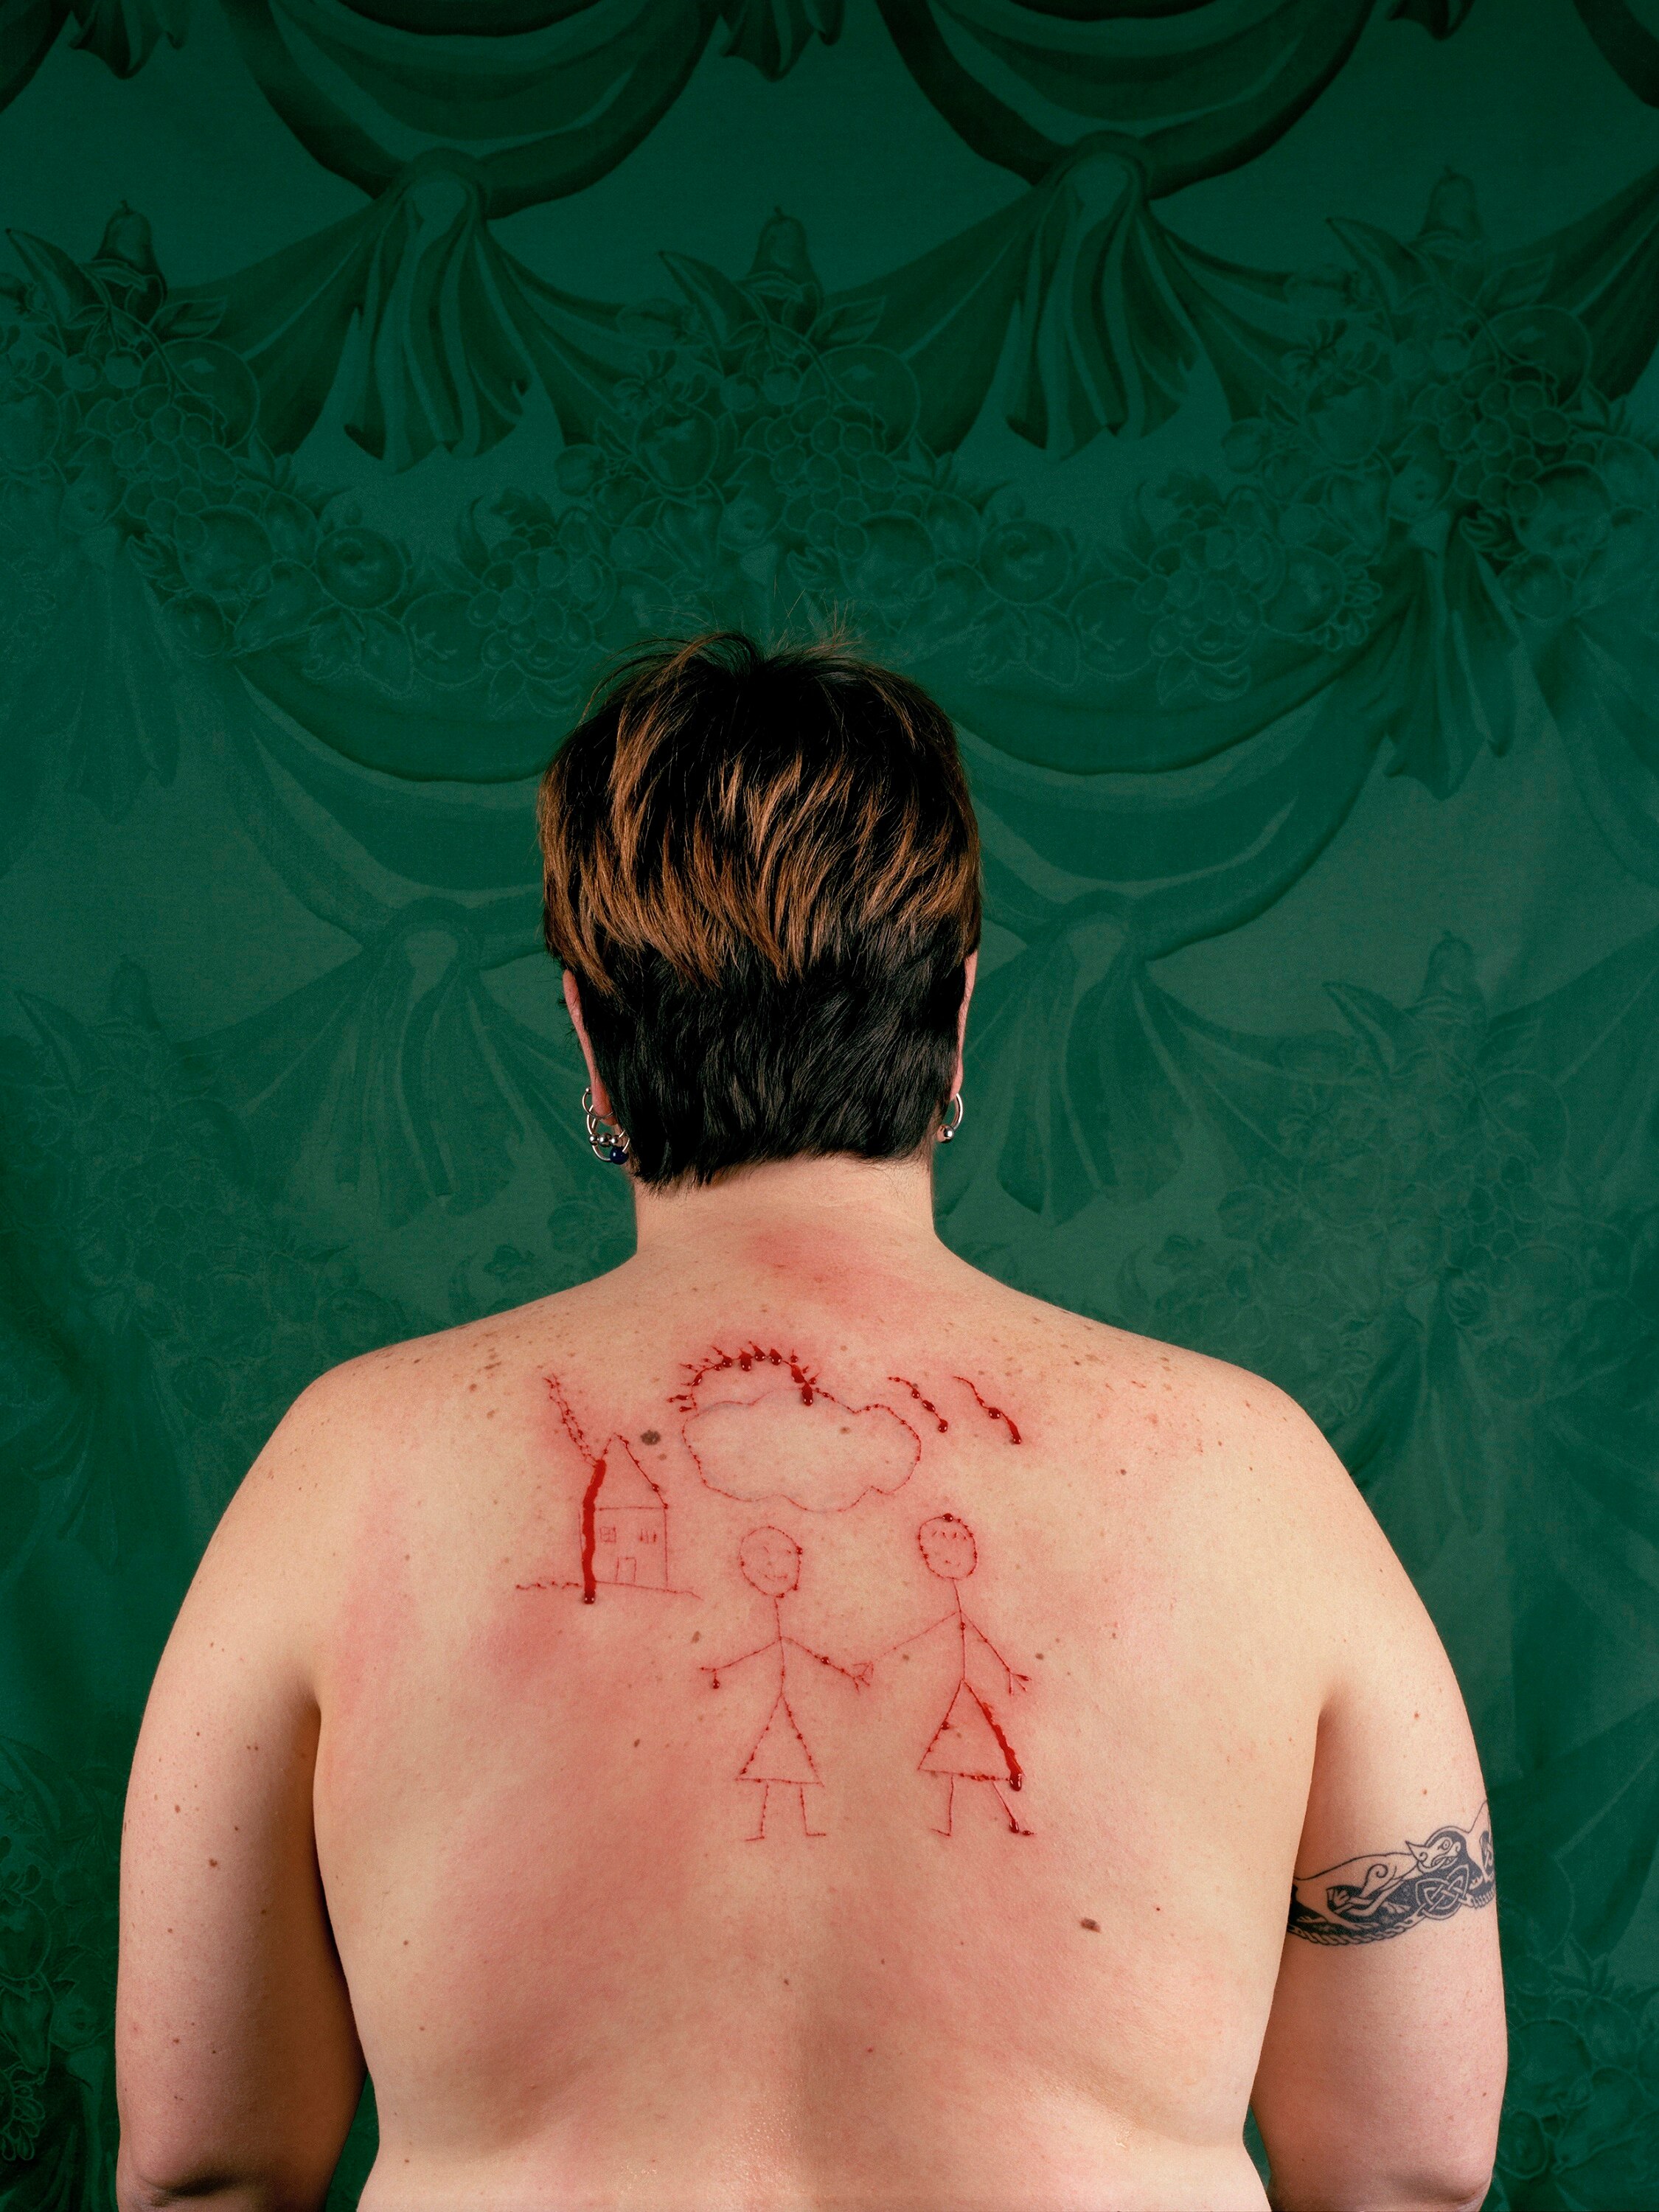 A woman has short hair, a tattoo on her right shoulder and a drawing of a lesbian family cut into the bare skin of her back